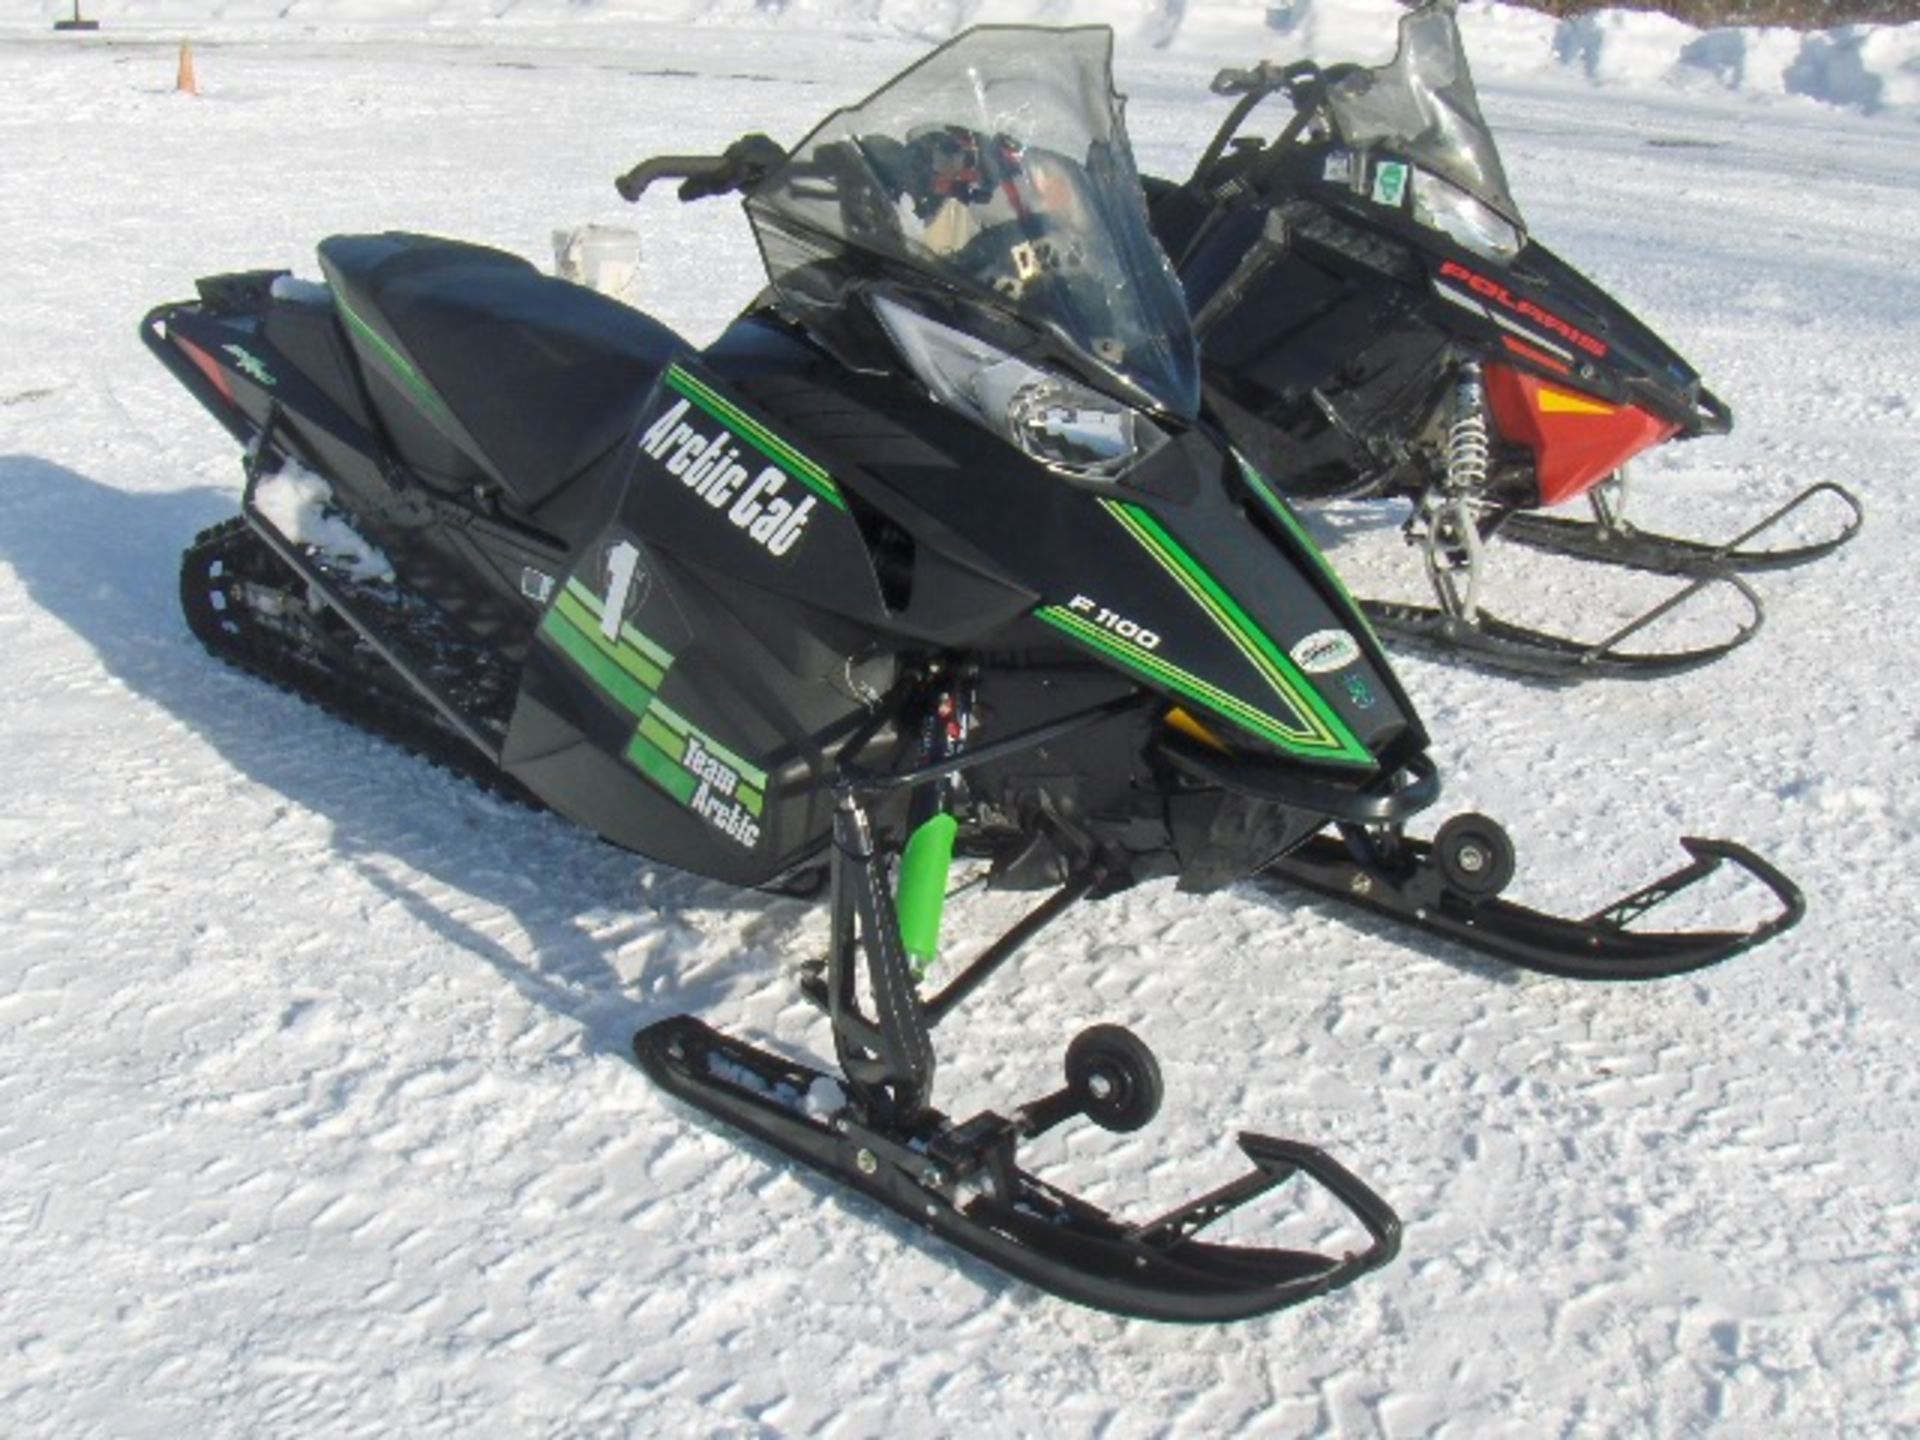 2012 ARCTIC CAT F 1100  4UF12SNW9CT116364 snowmobile, owner started at time of auction check in, - Image 2 of 4